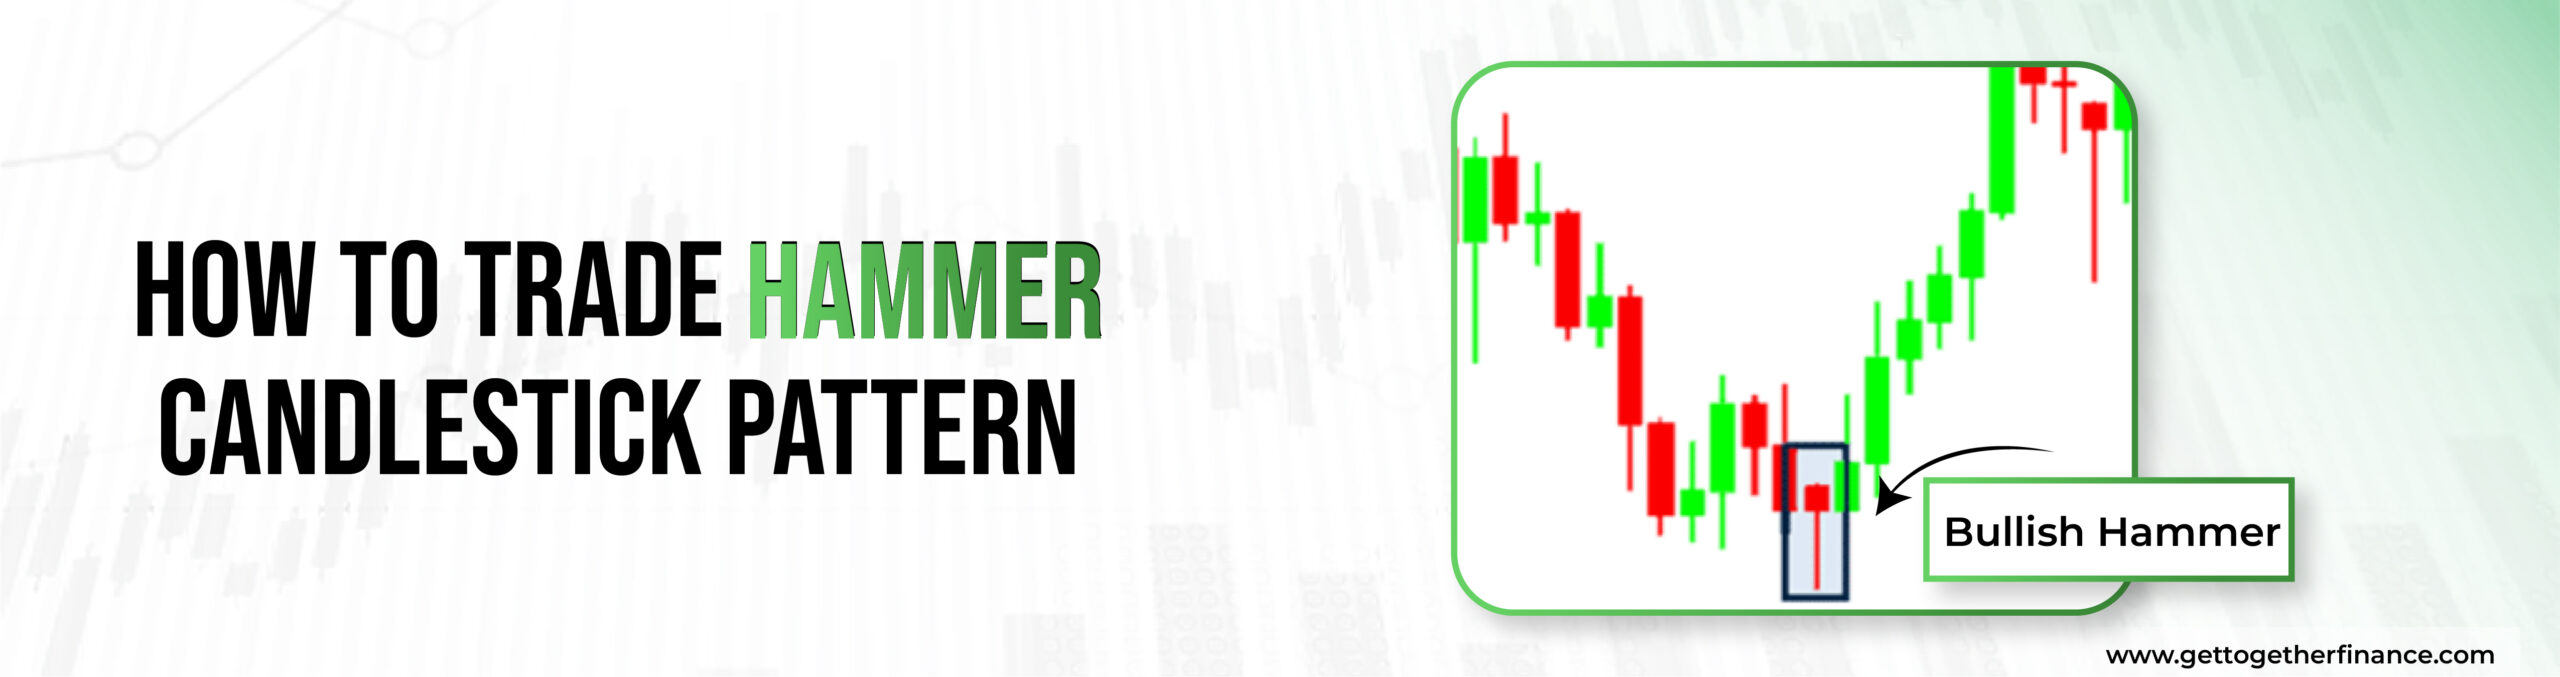 how to trade hammer candlestick pattern